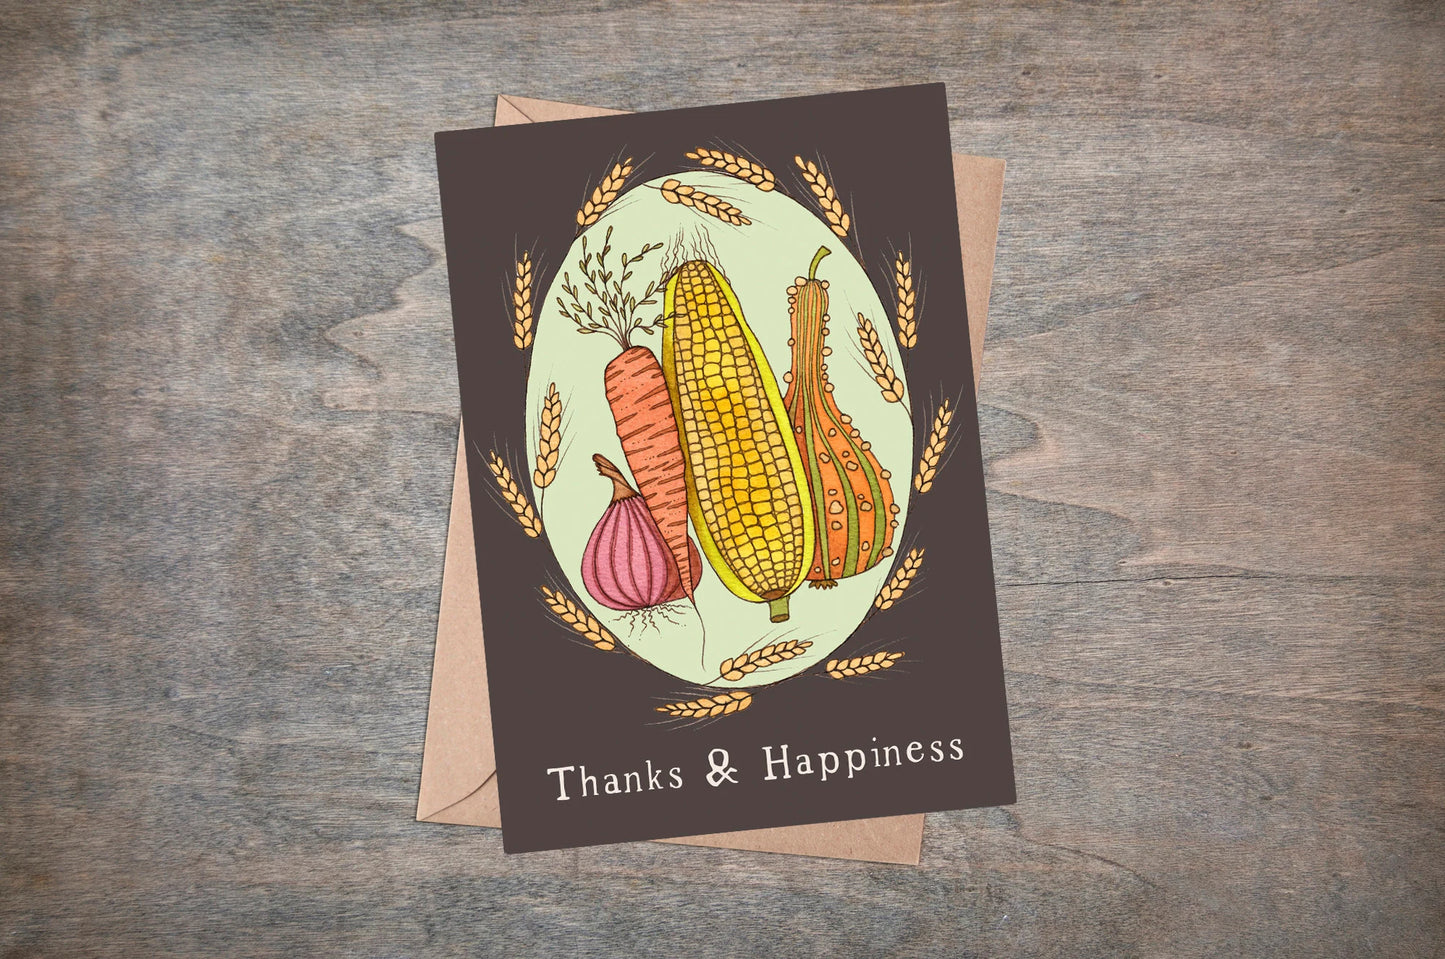 Thanks And Happiness Greetings Card & Envelope - Brown Green Fall Thanksgiving Card - Onion Carrot Corn Gourd Wheat Vegetable Harvest Card